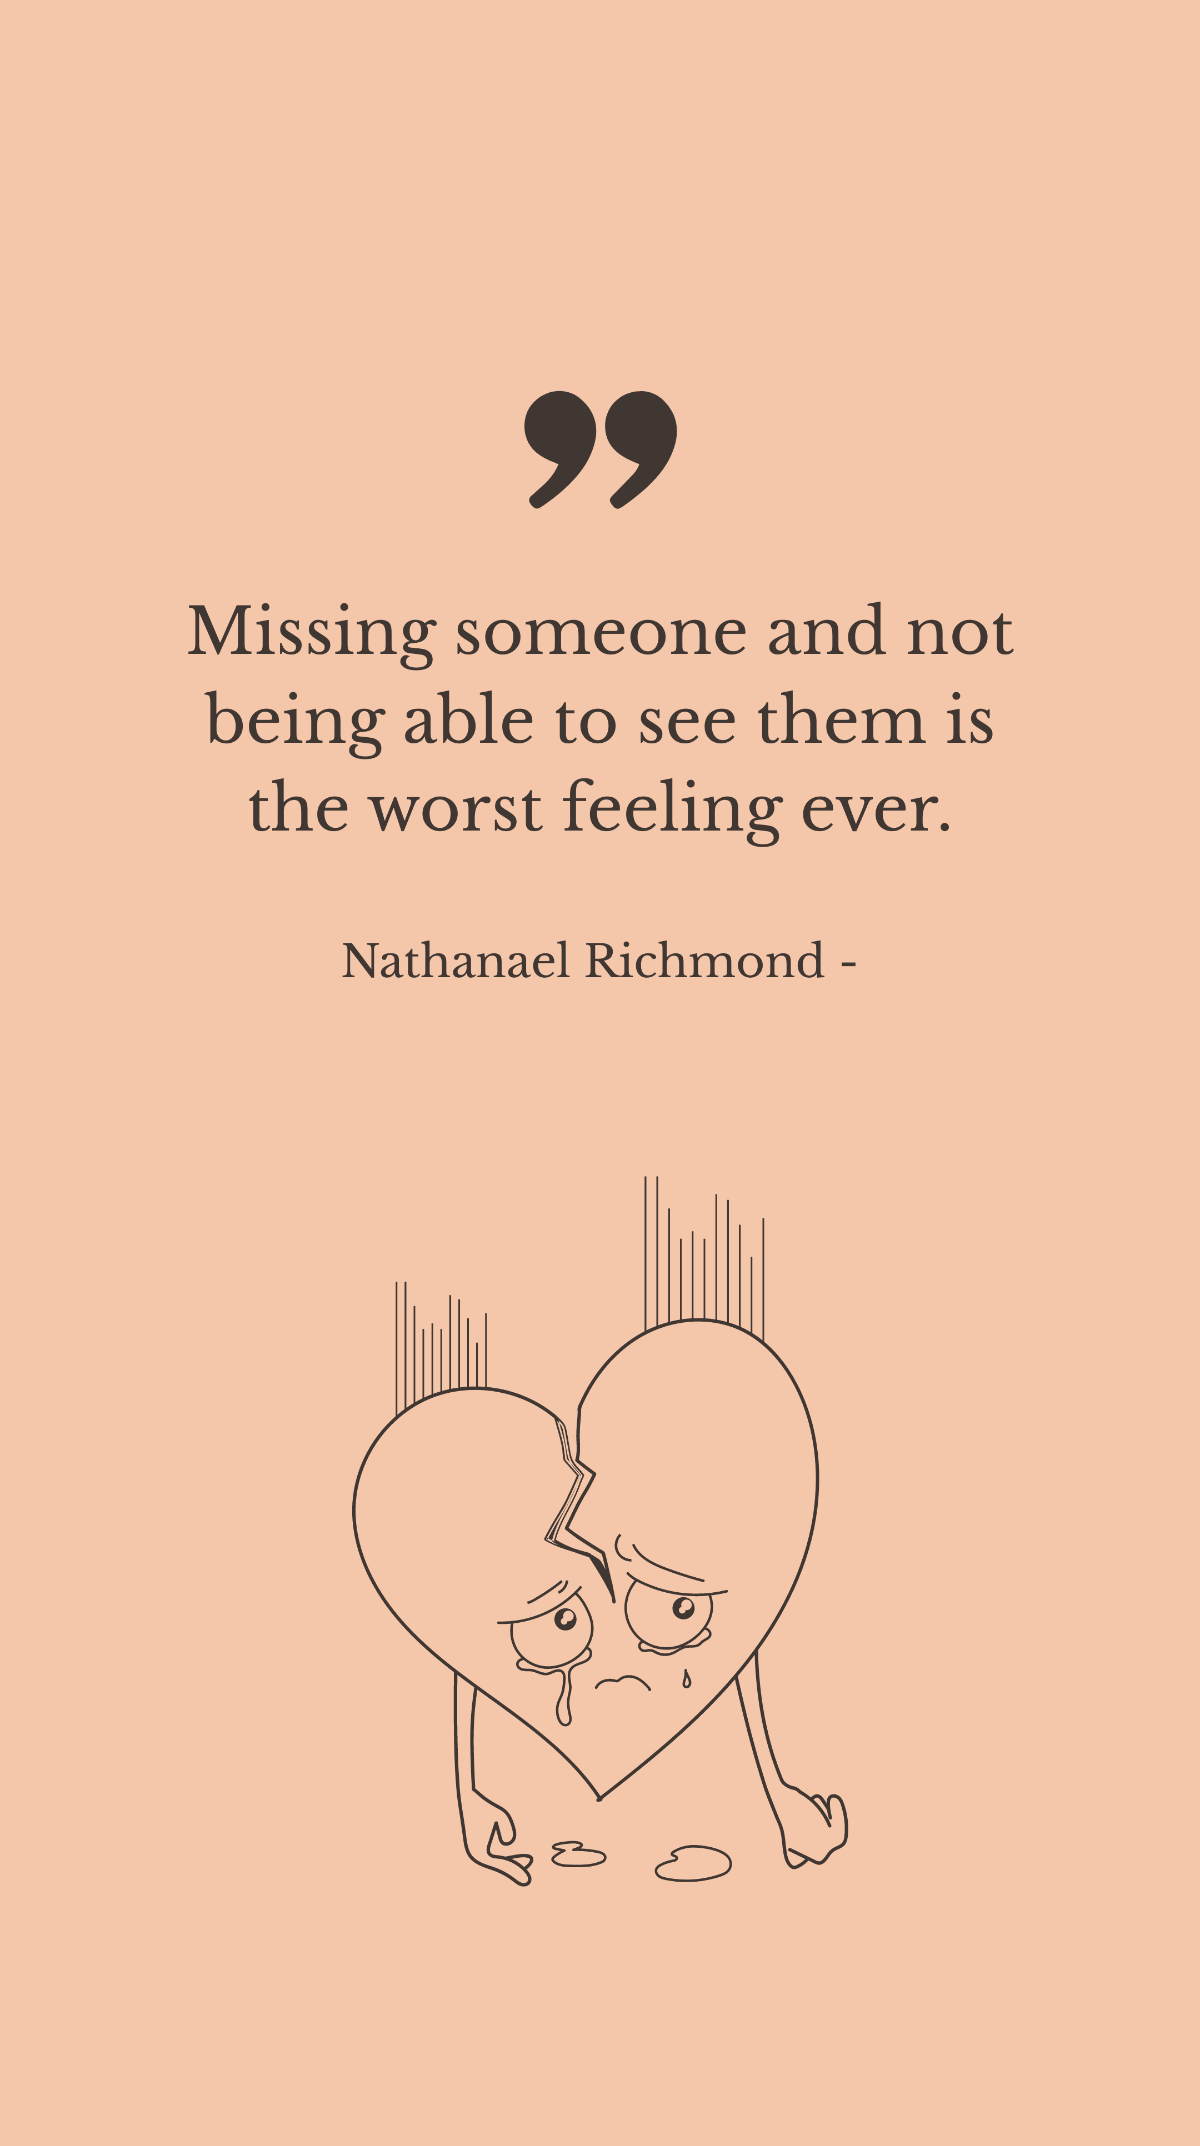 Nathanael Richmond - Missing someone and not being able to see them is the worst feeling ever. Template